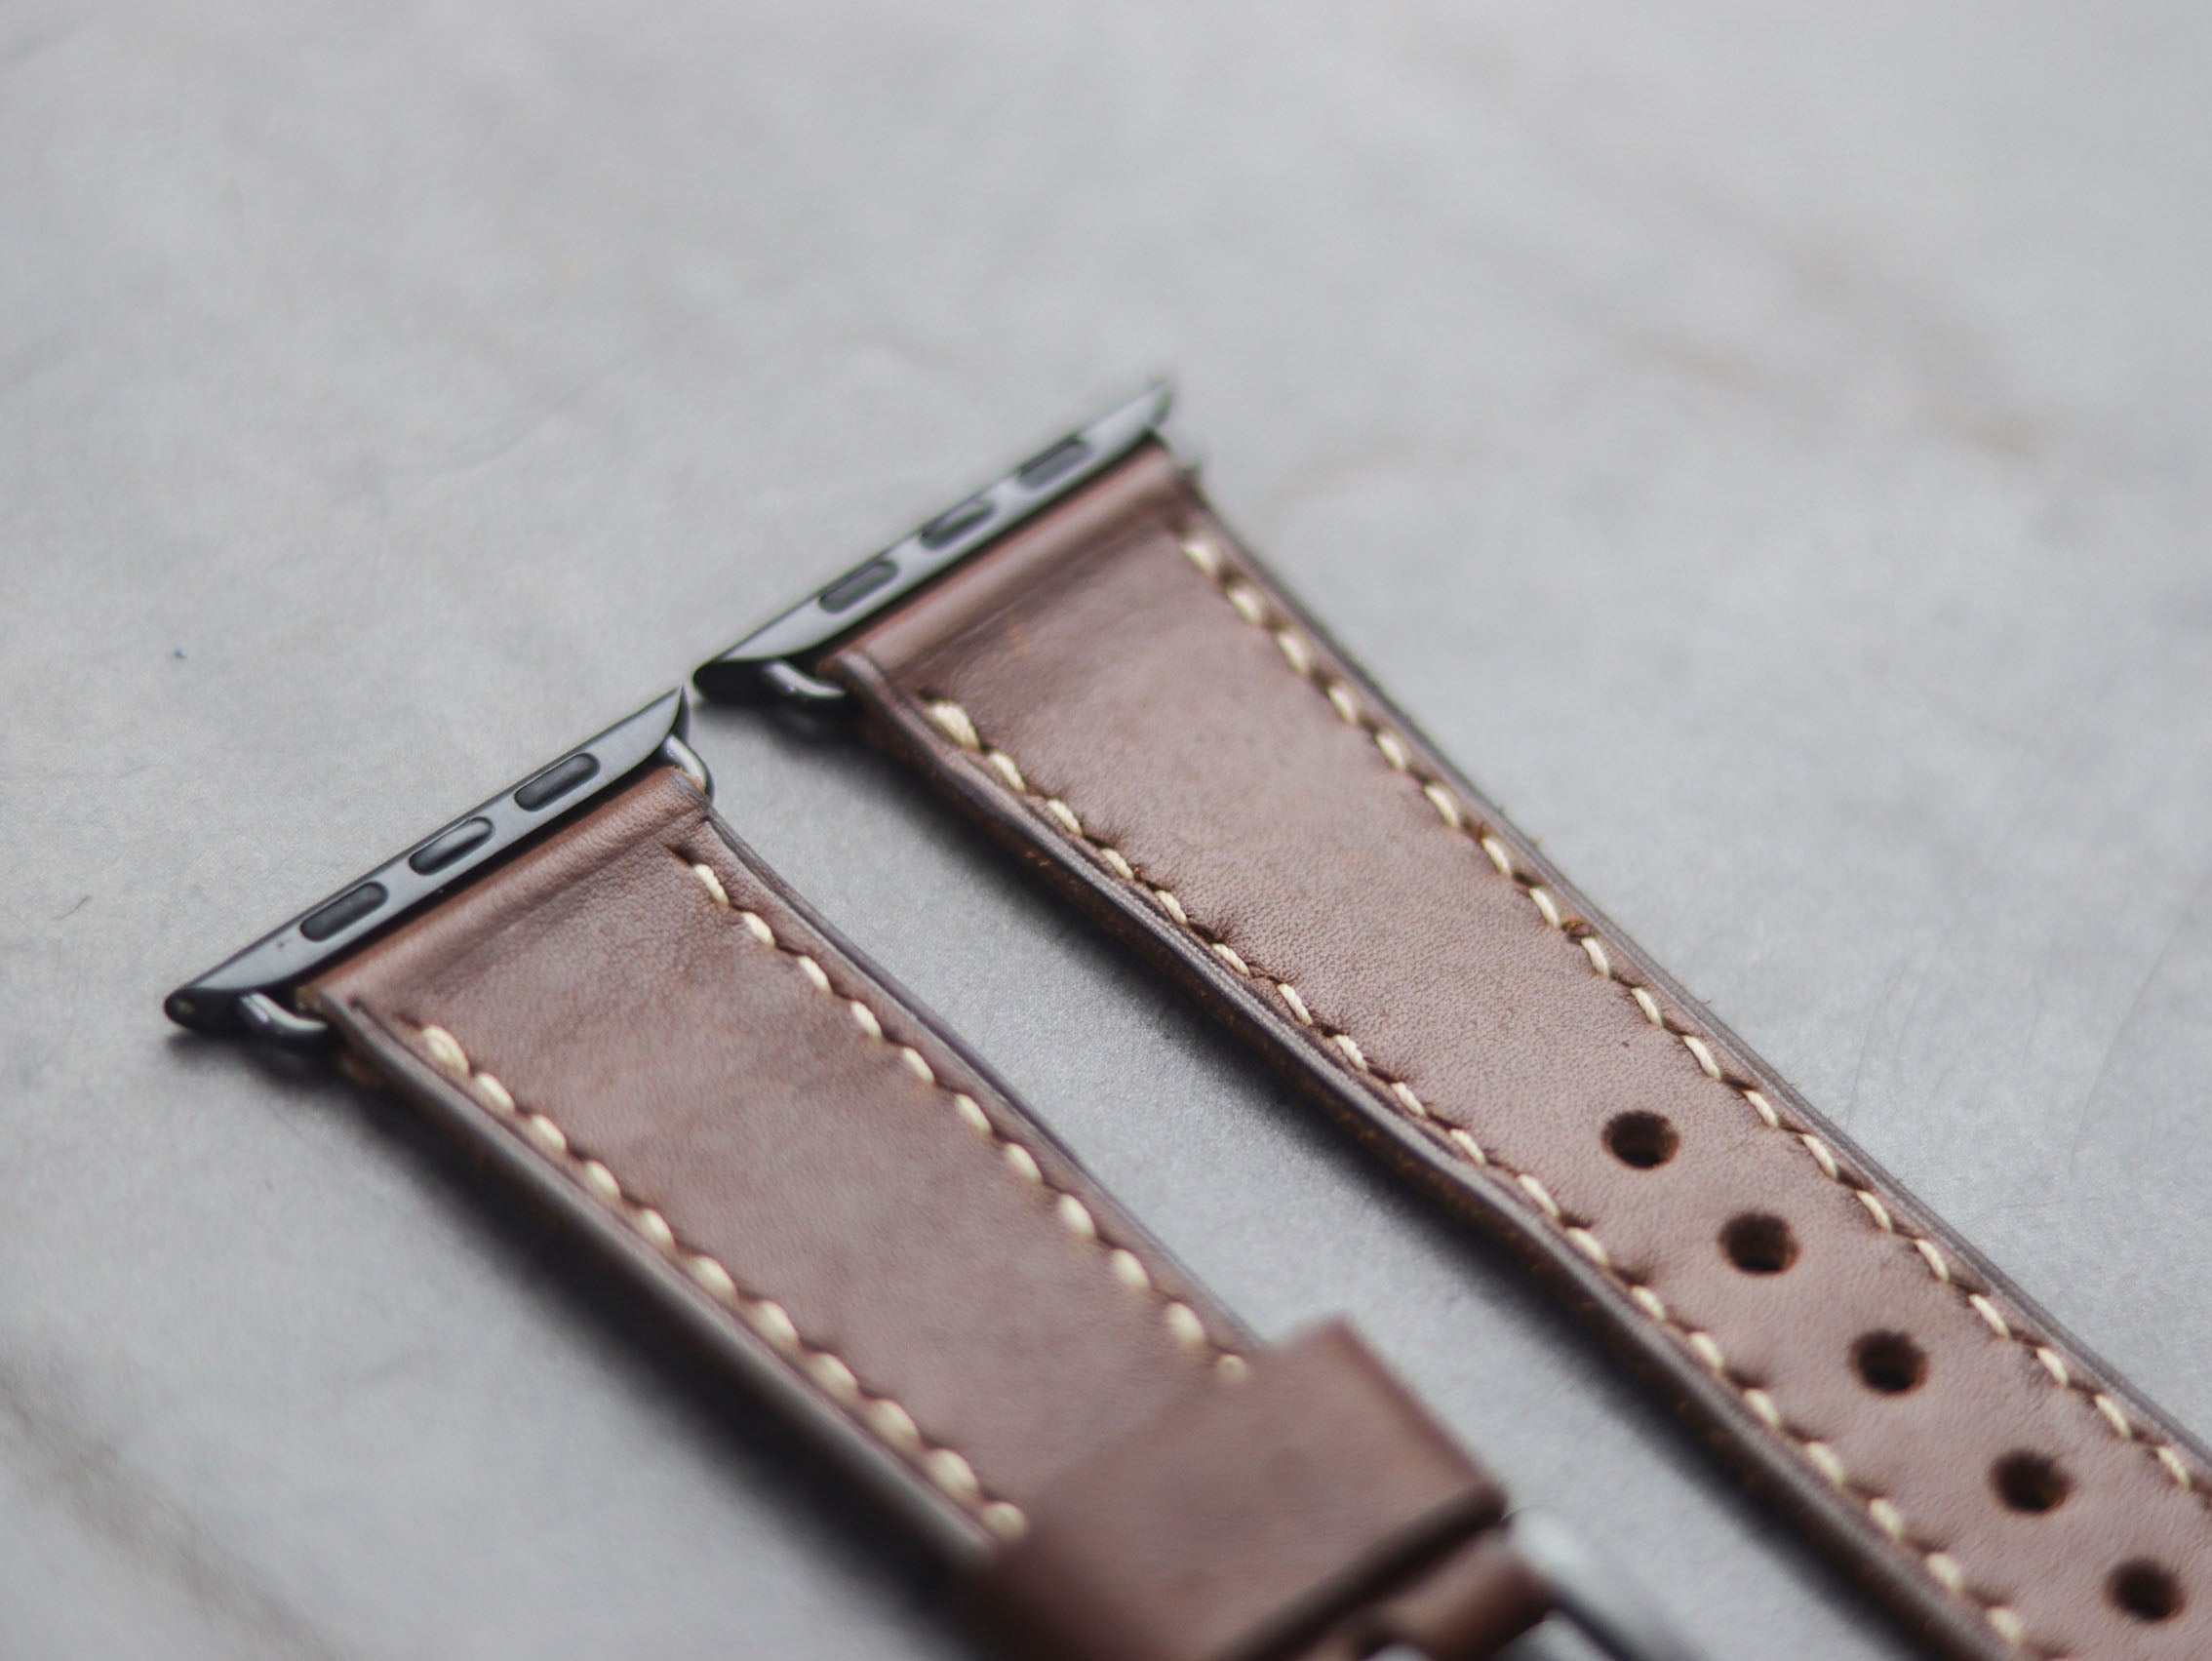 CHESTNUT BROWN FULL STITCHED HAND-CRAFTED APPLE WATCH STRAPS